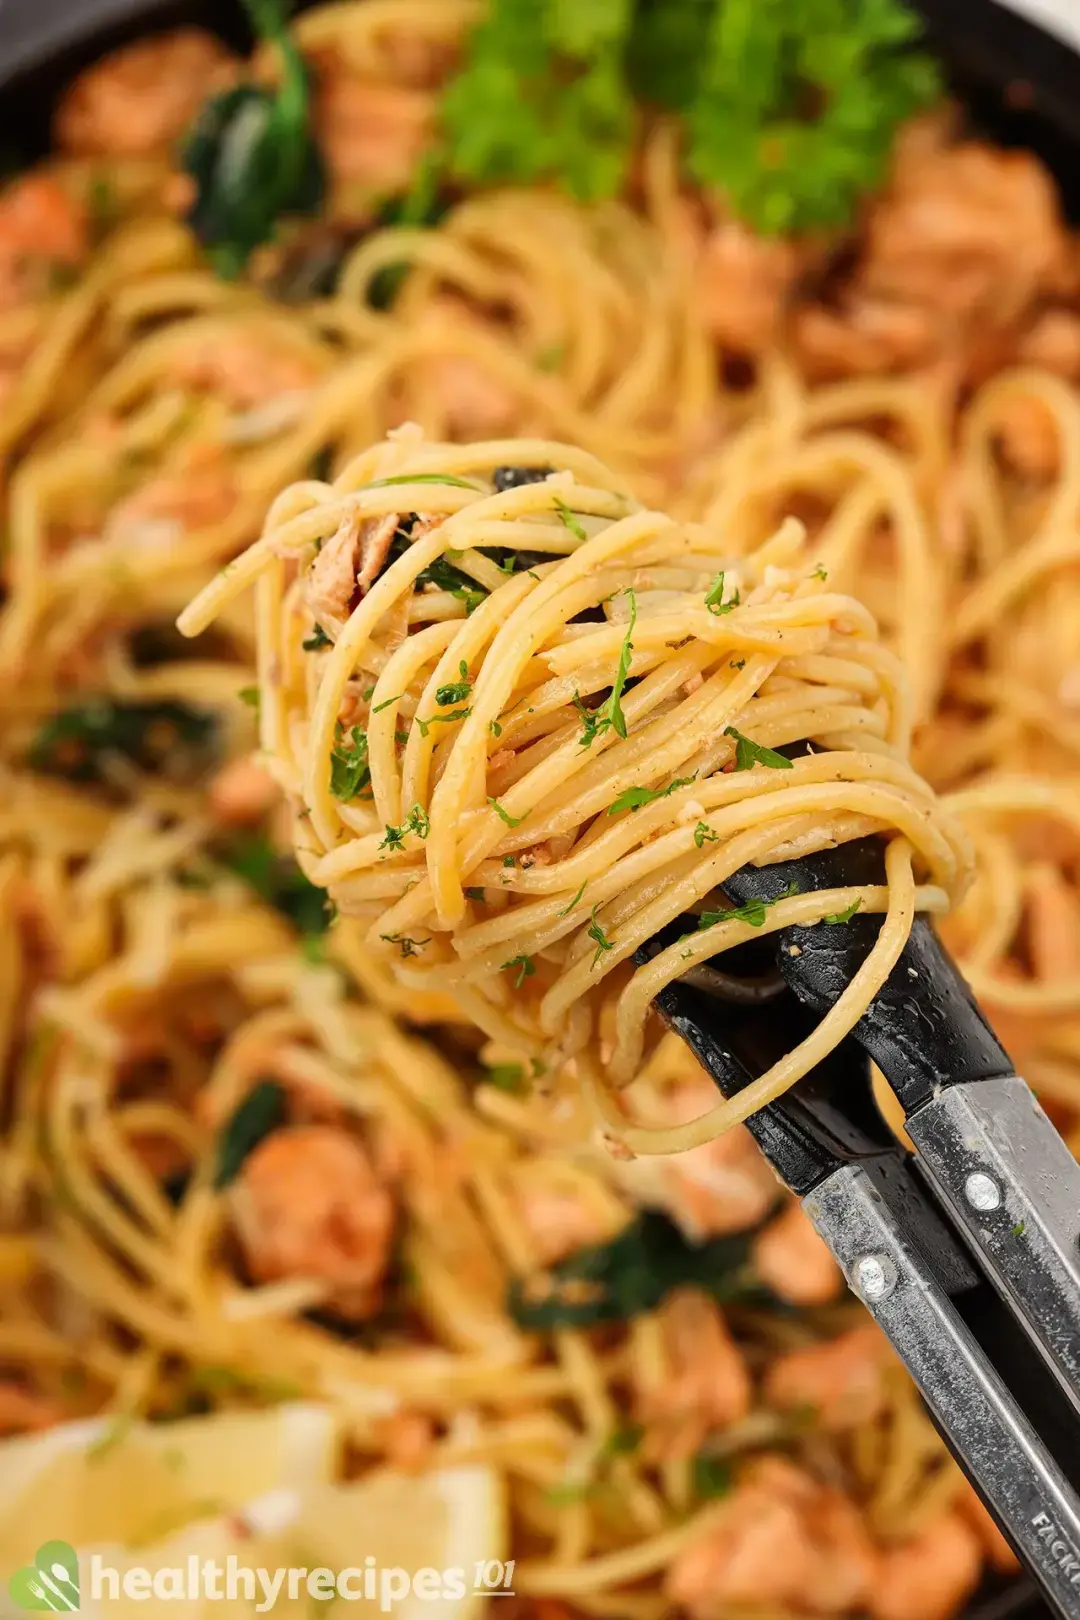 A pair of tongs with spaghetti and chopped parsley wrapped around it with a skillet containing spaghetti salmon in the blurred background